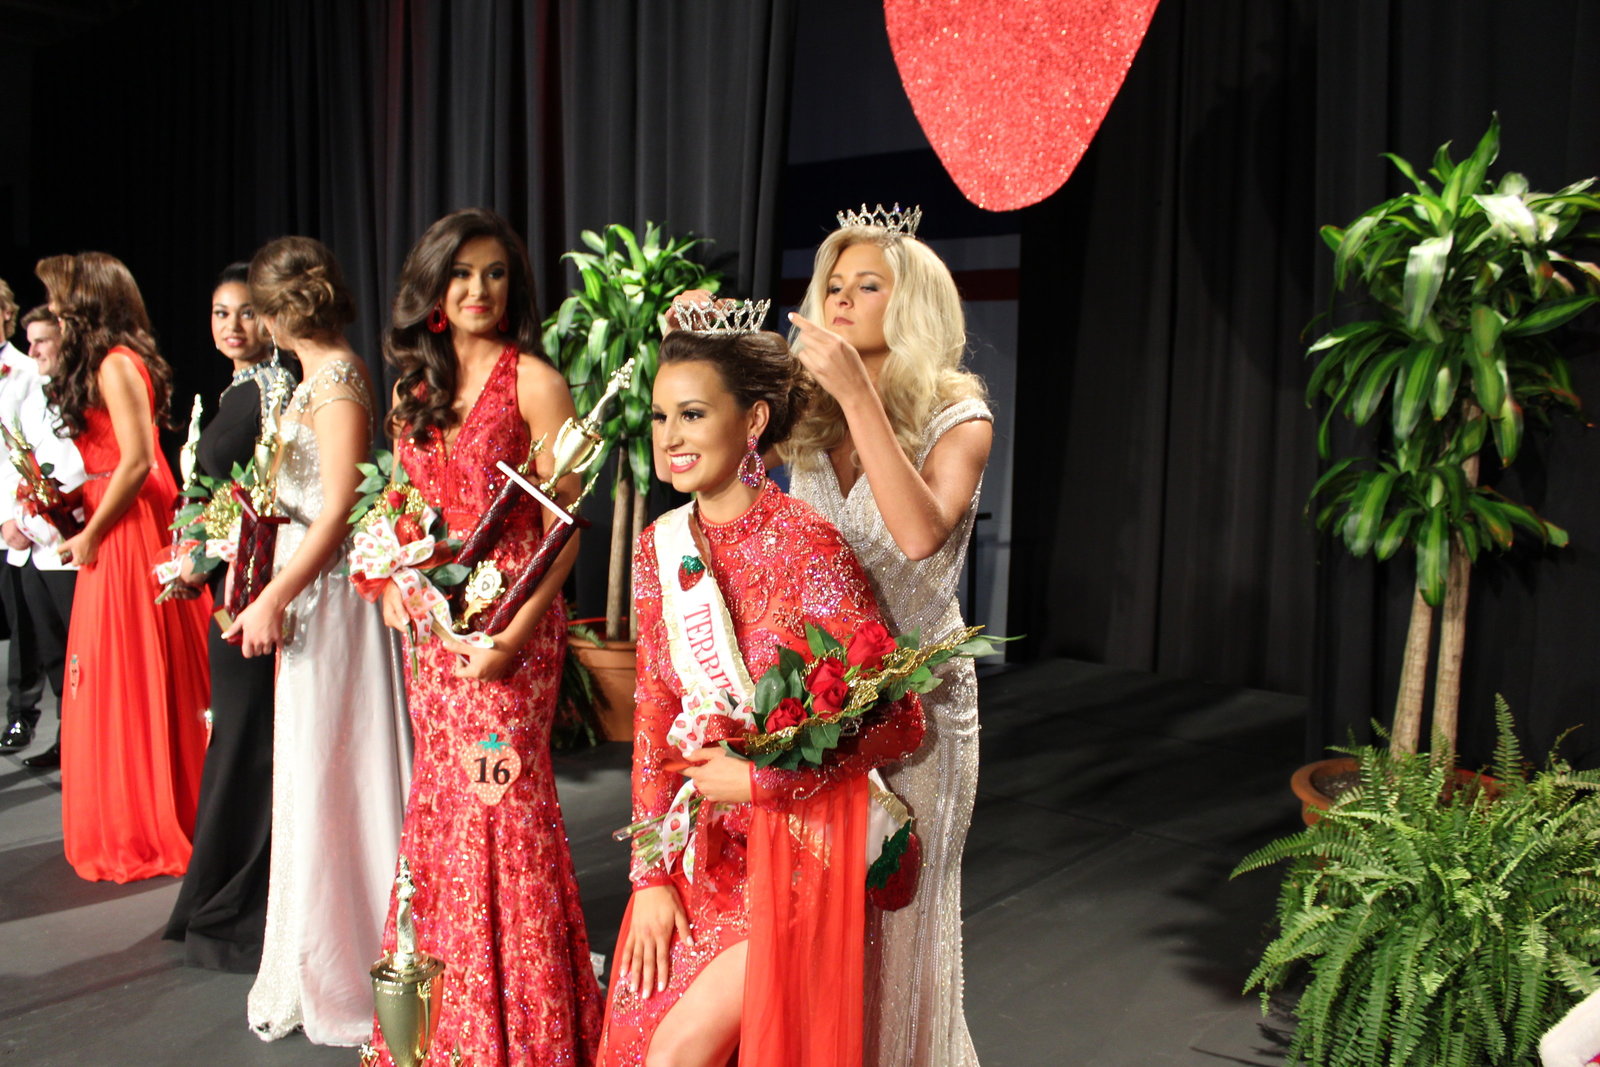 West Tennessee Strawberry Festival - Humboldt TN - Pageant - Main Terr7